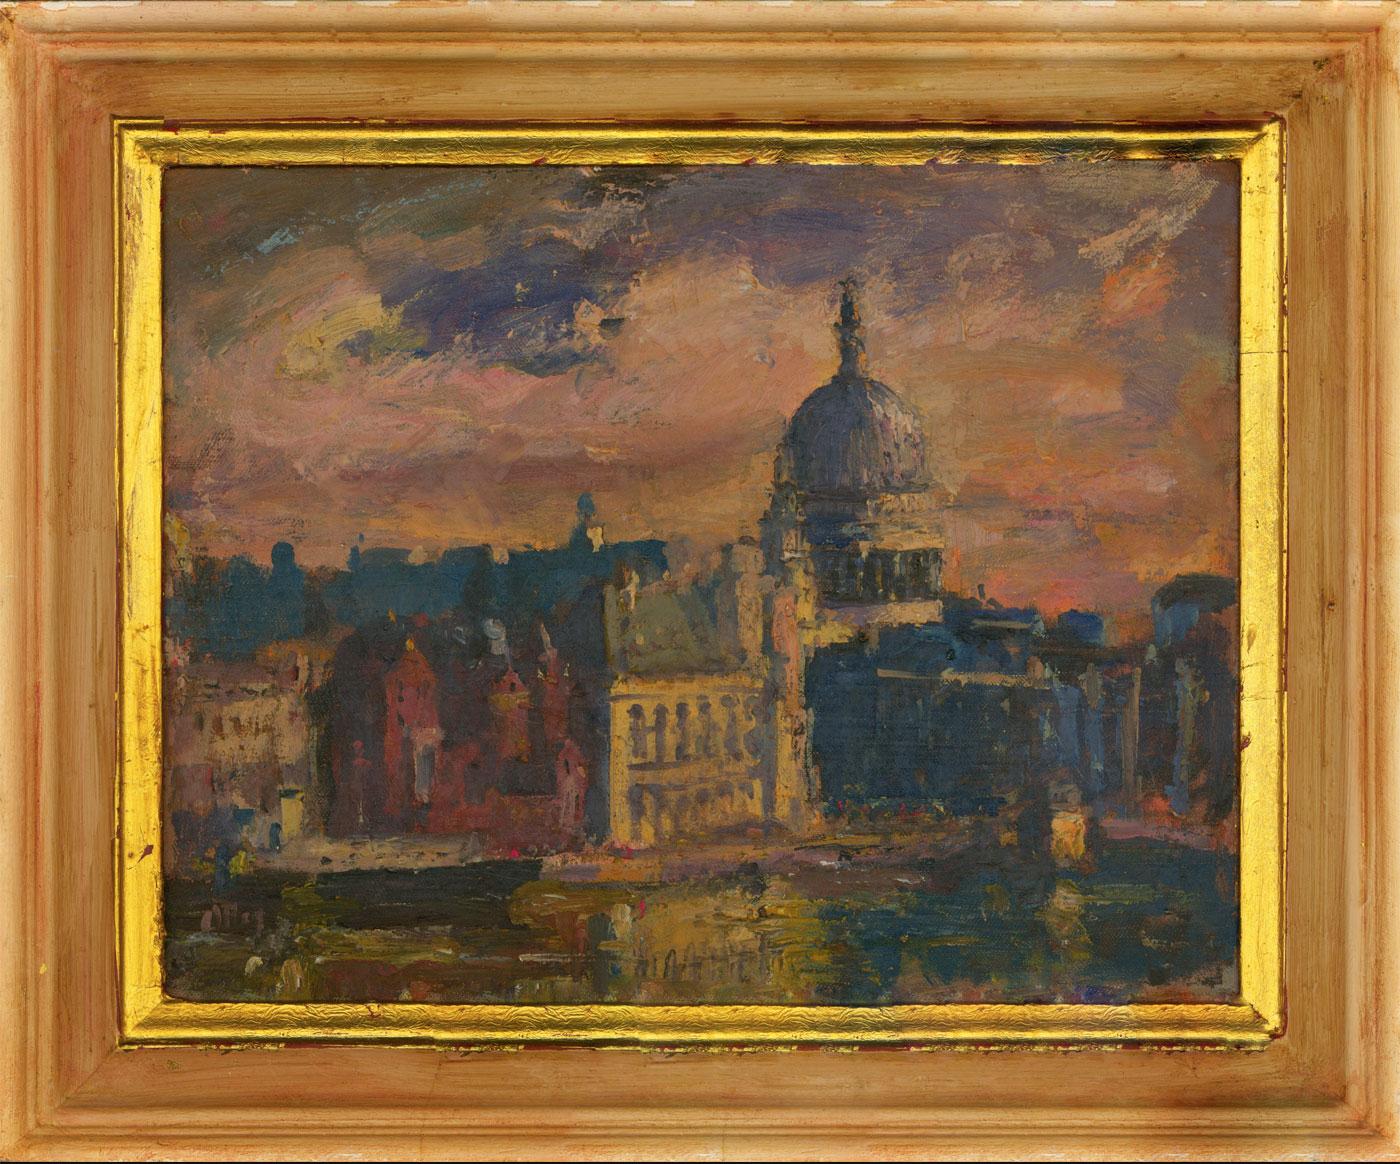 A very well executed impressionistic cityscape of London, clearly showing St. Paul's Cathedral and the River Thames in the foreground. The pink and blue tones give this painting a warm ambiance, and the areas of thick impasto add texture. It has